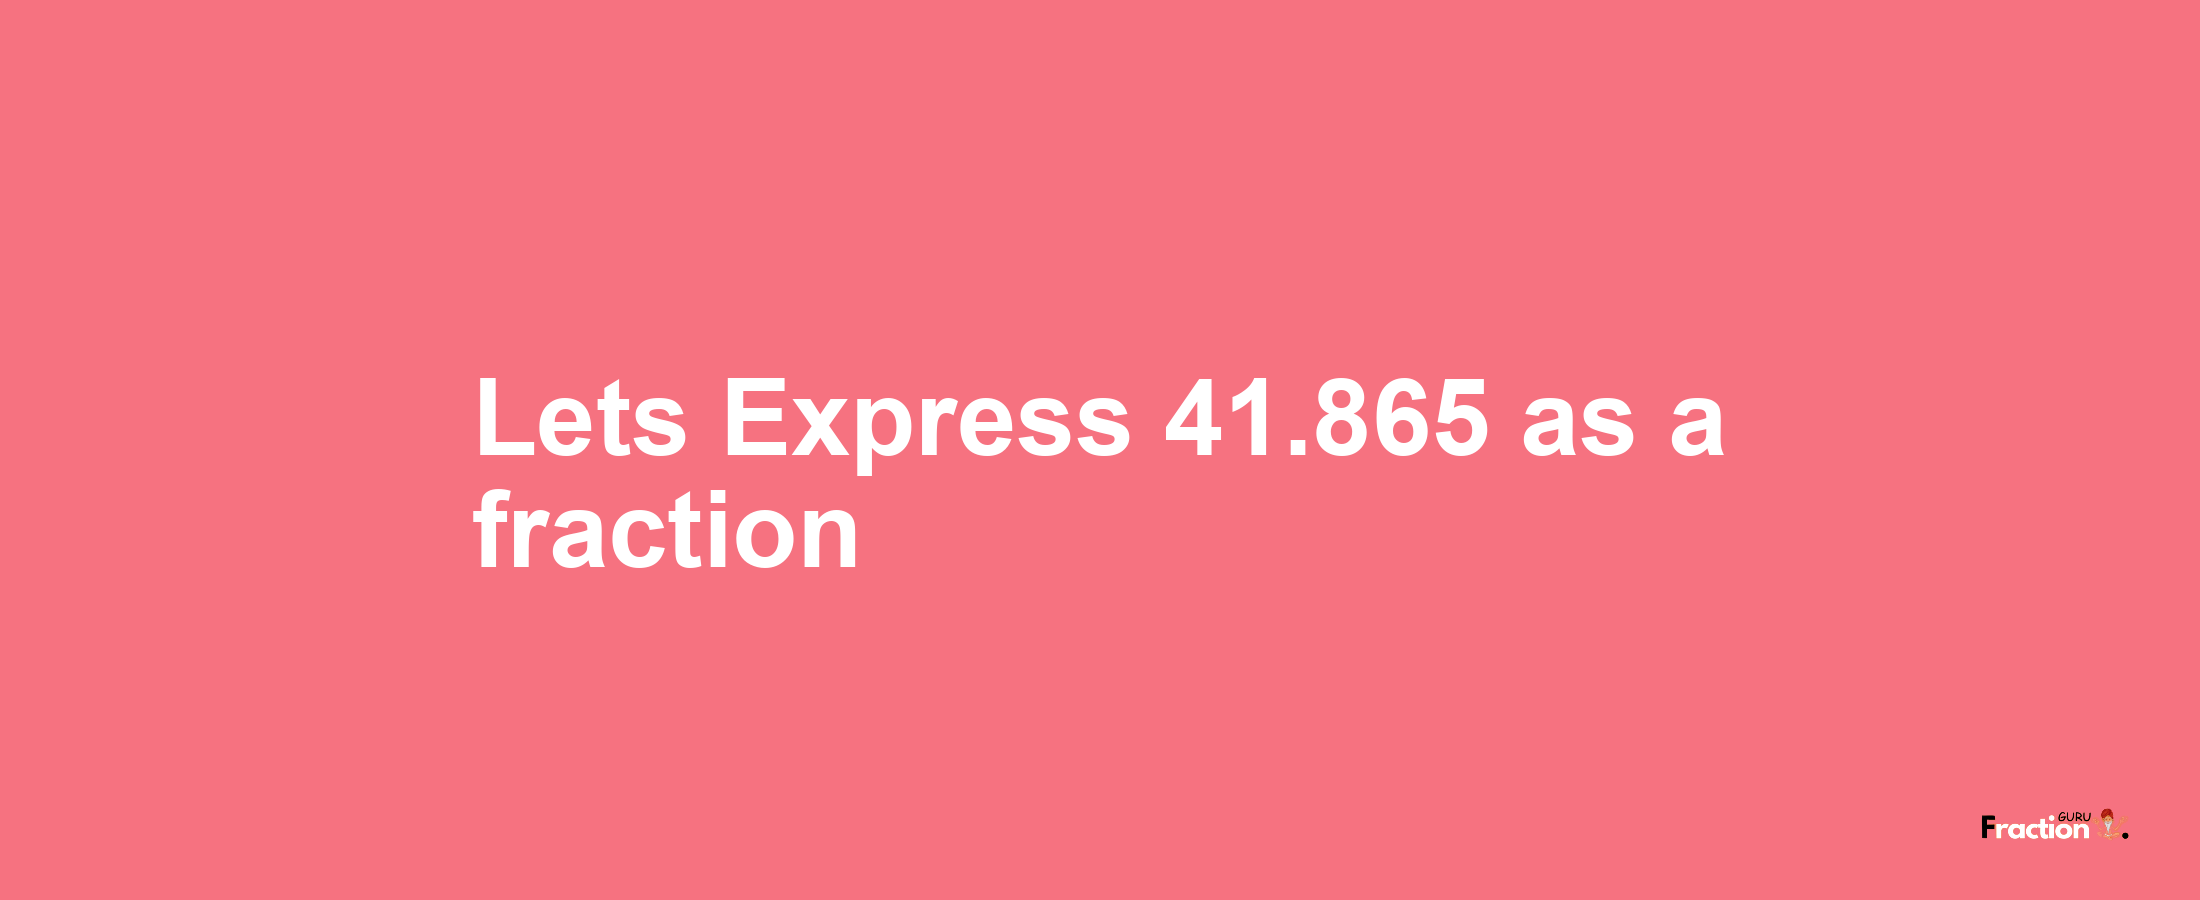 Lets Express 41.865 as afraction